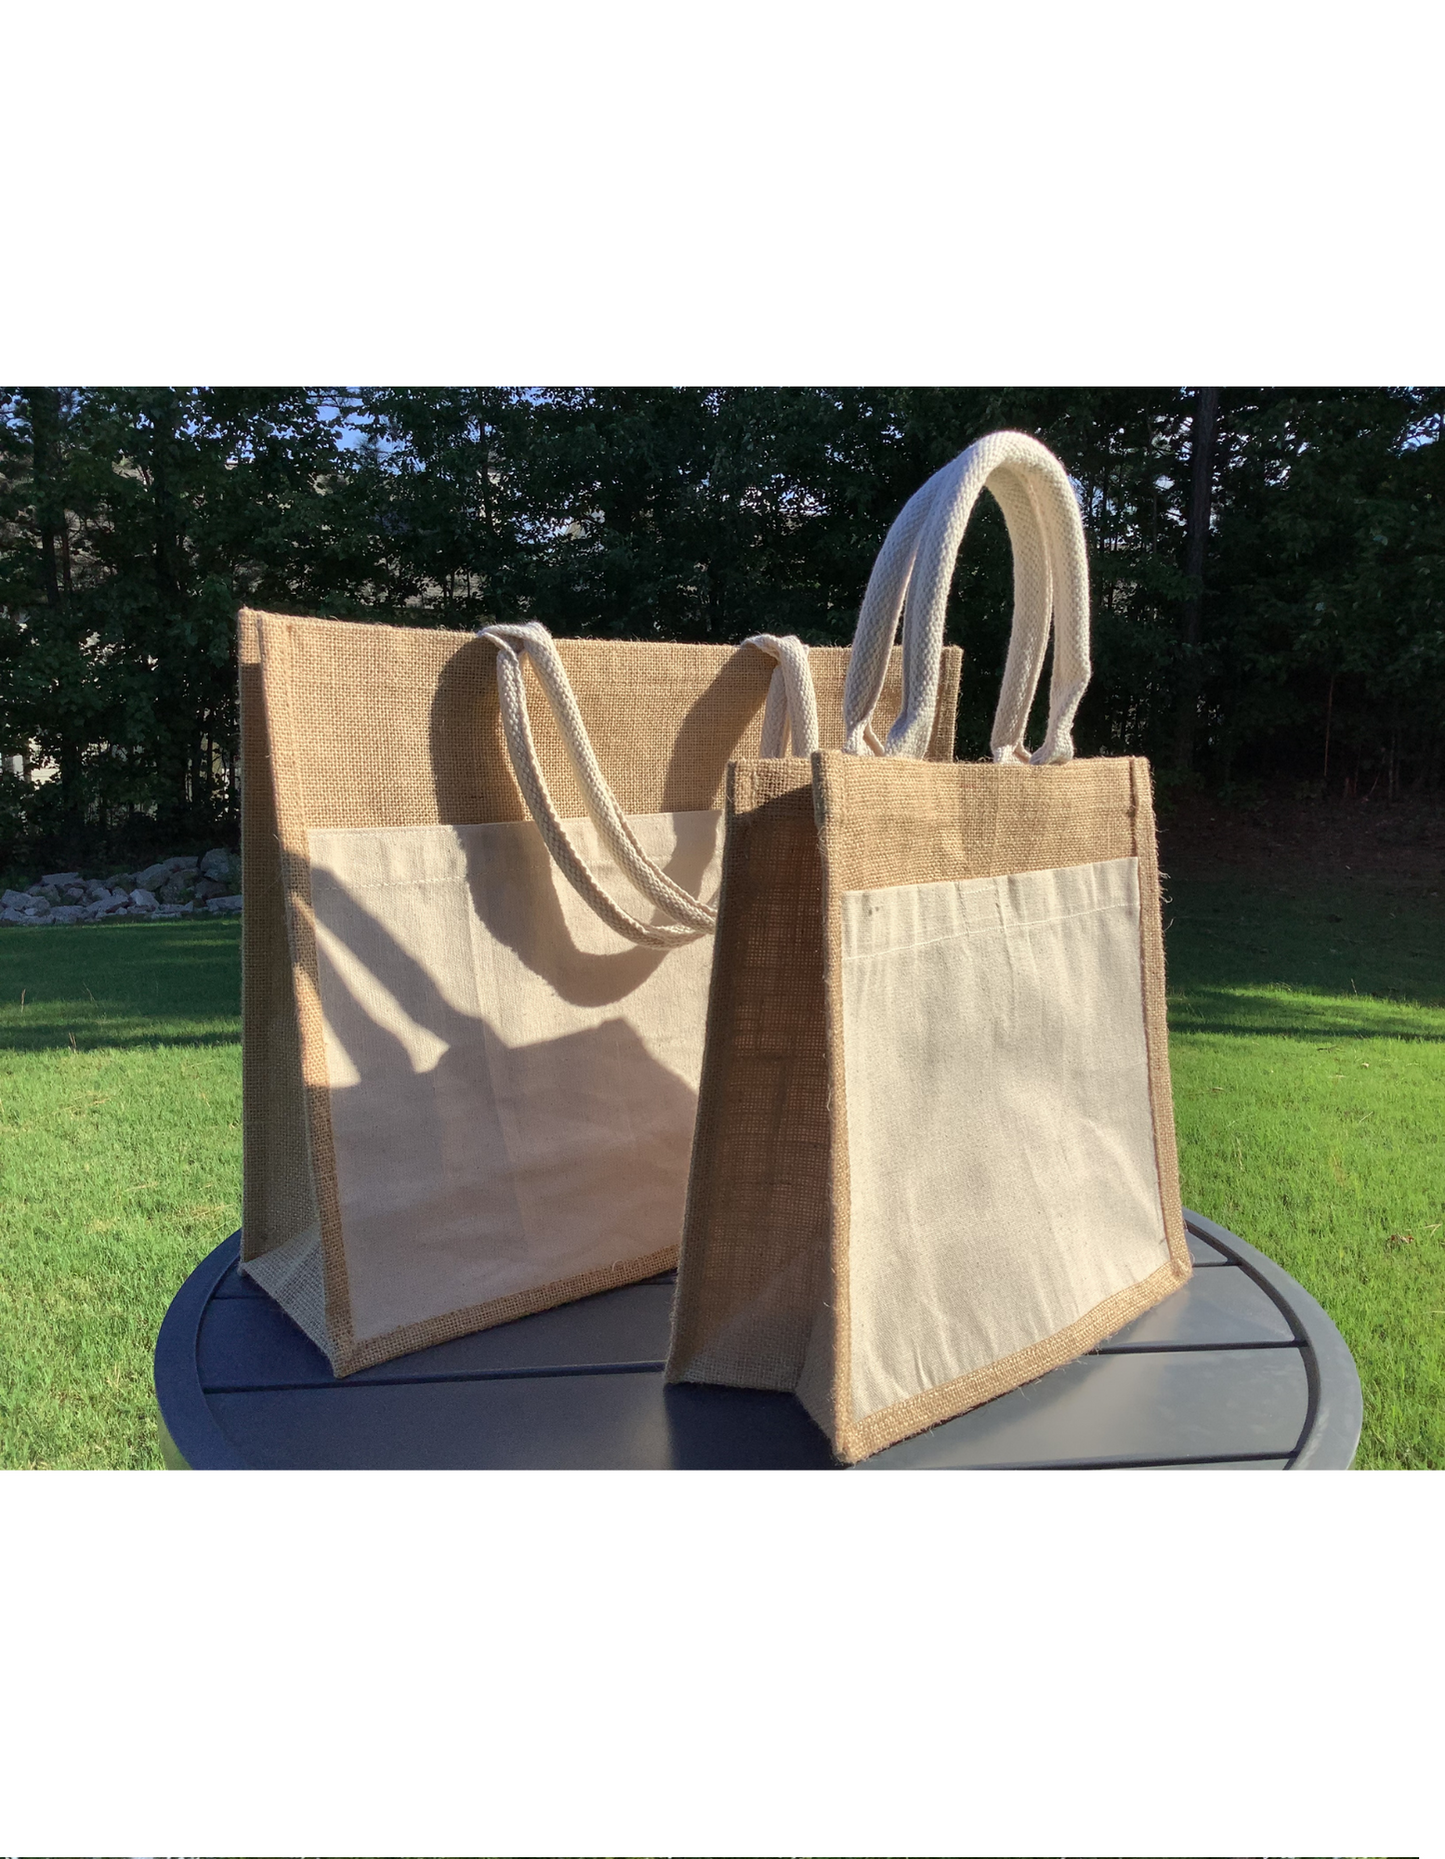 Small Custom Jute Tote Bag with Canvas front Pocket| Tailor-Made Keepsakes